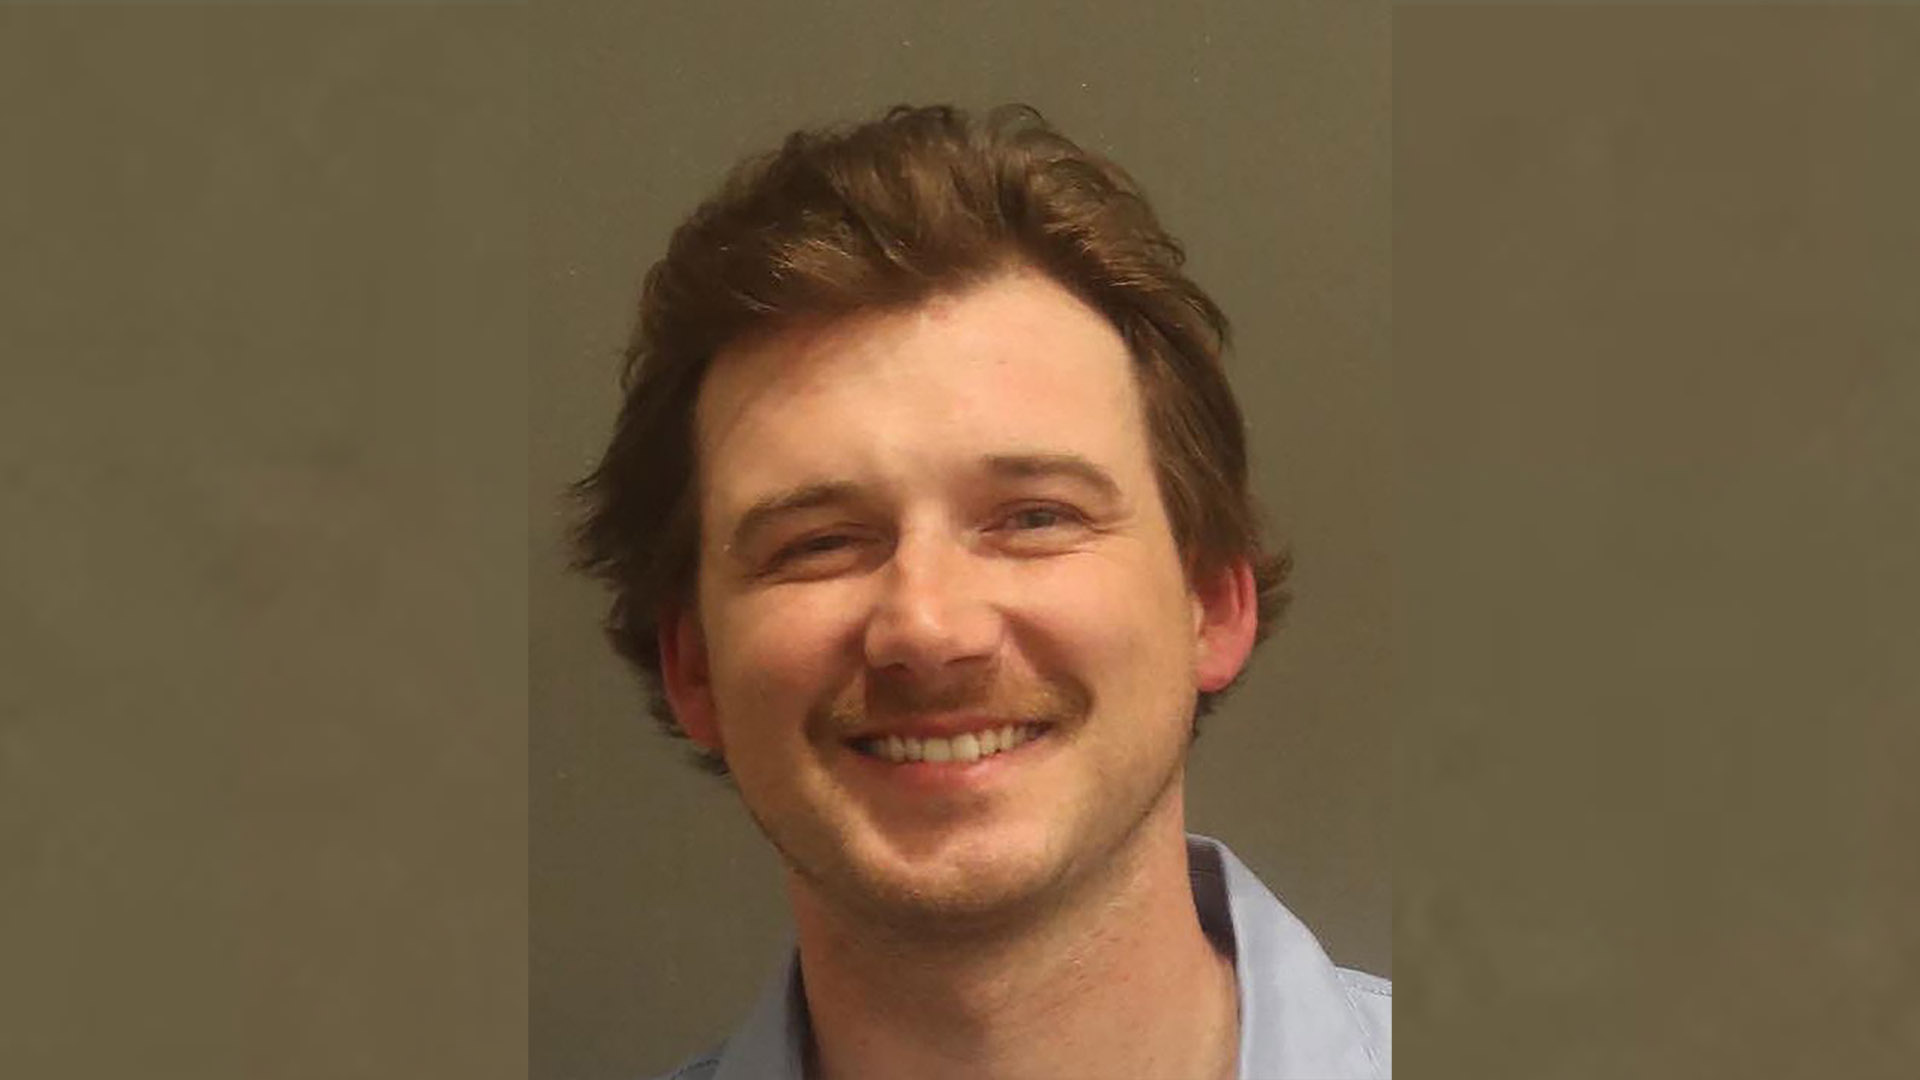 Country star Morgan Wallen’s criminal history from DUI charge to new arrest for ‘throwing chair off Nashville bar roof’ [Video]